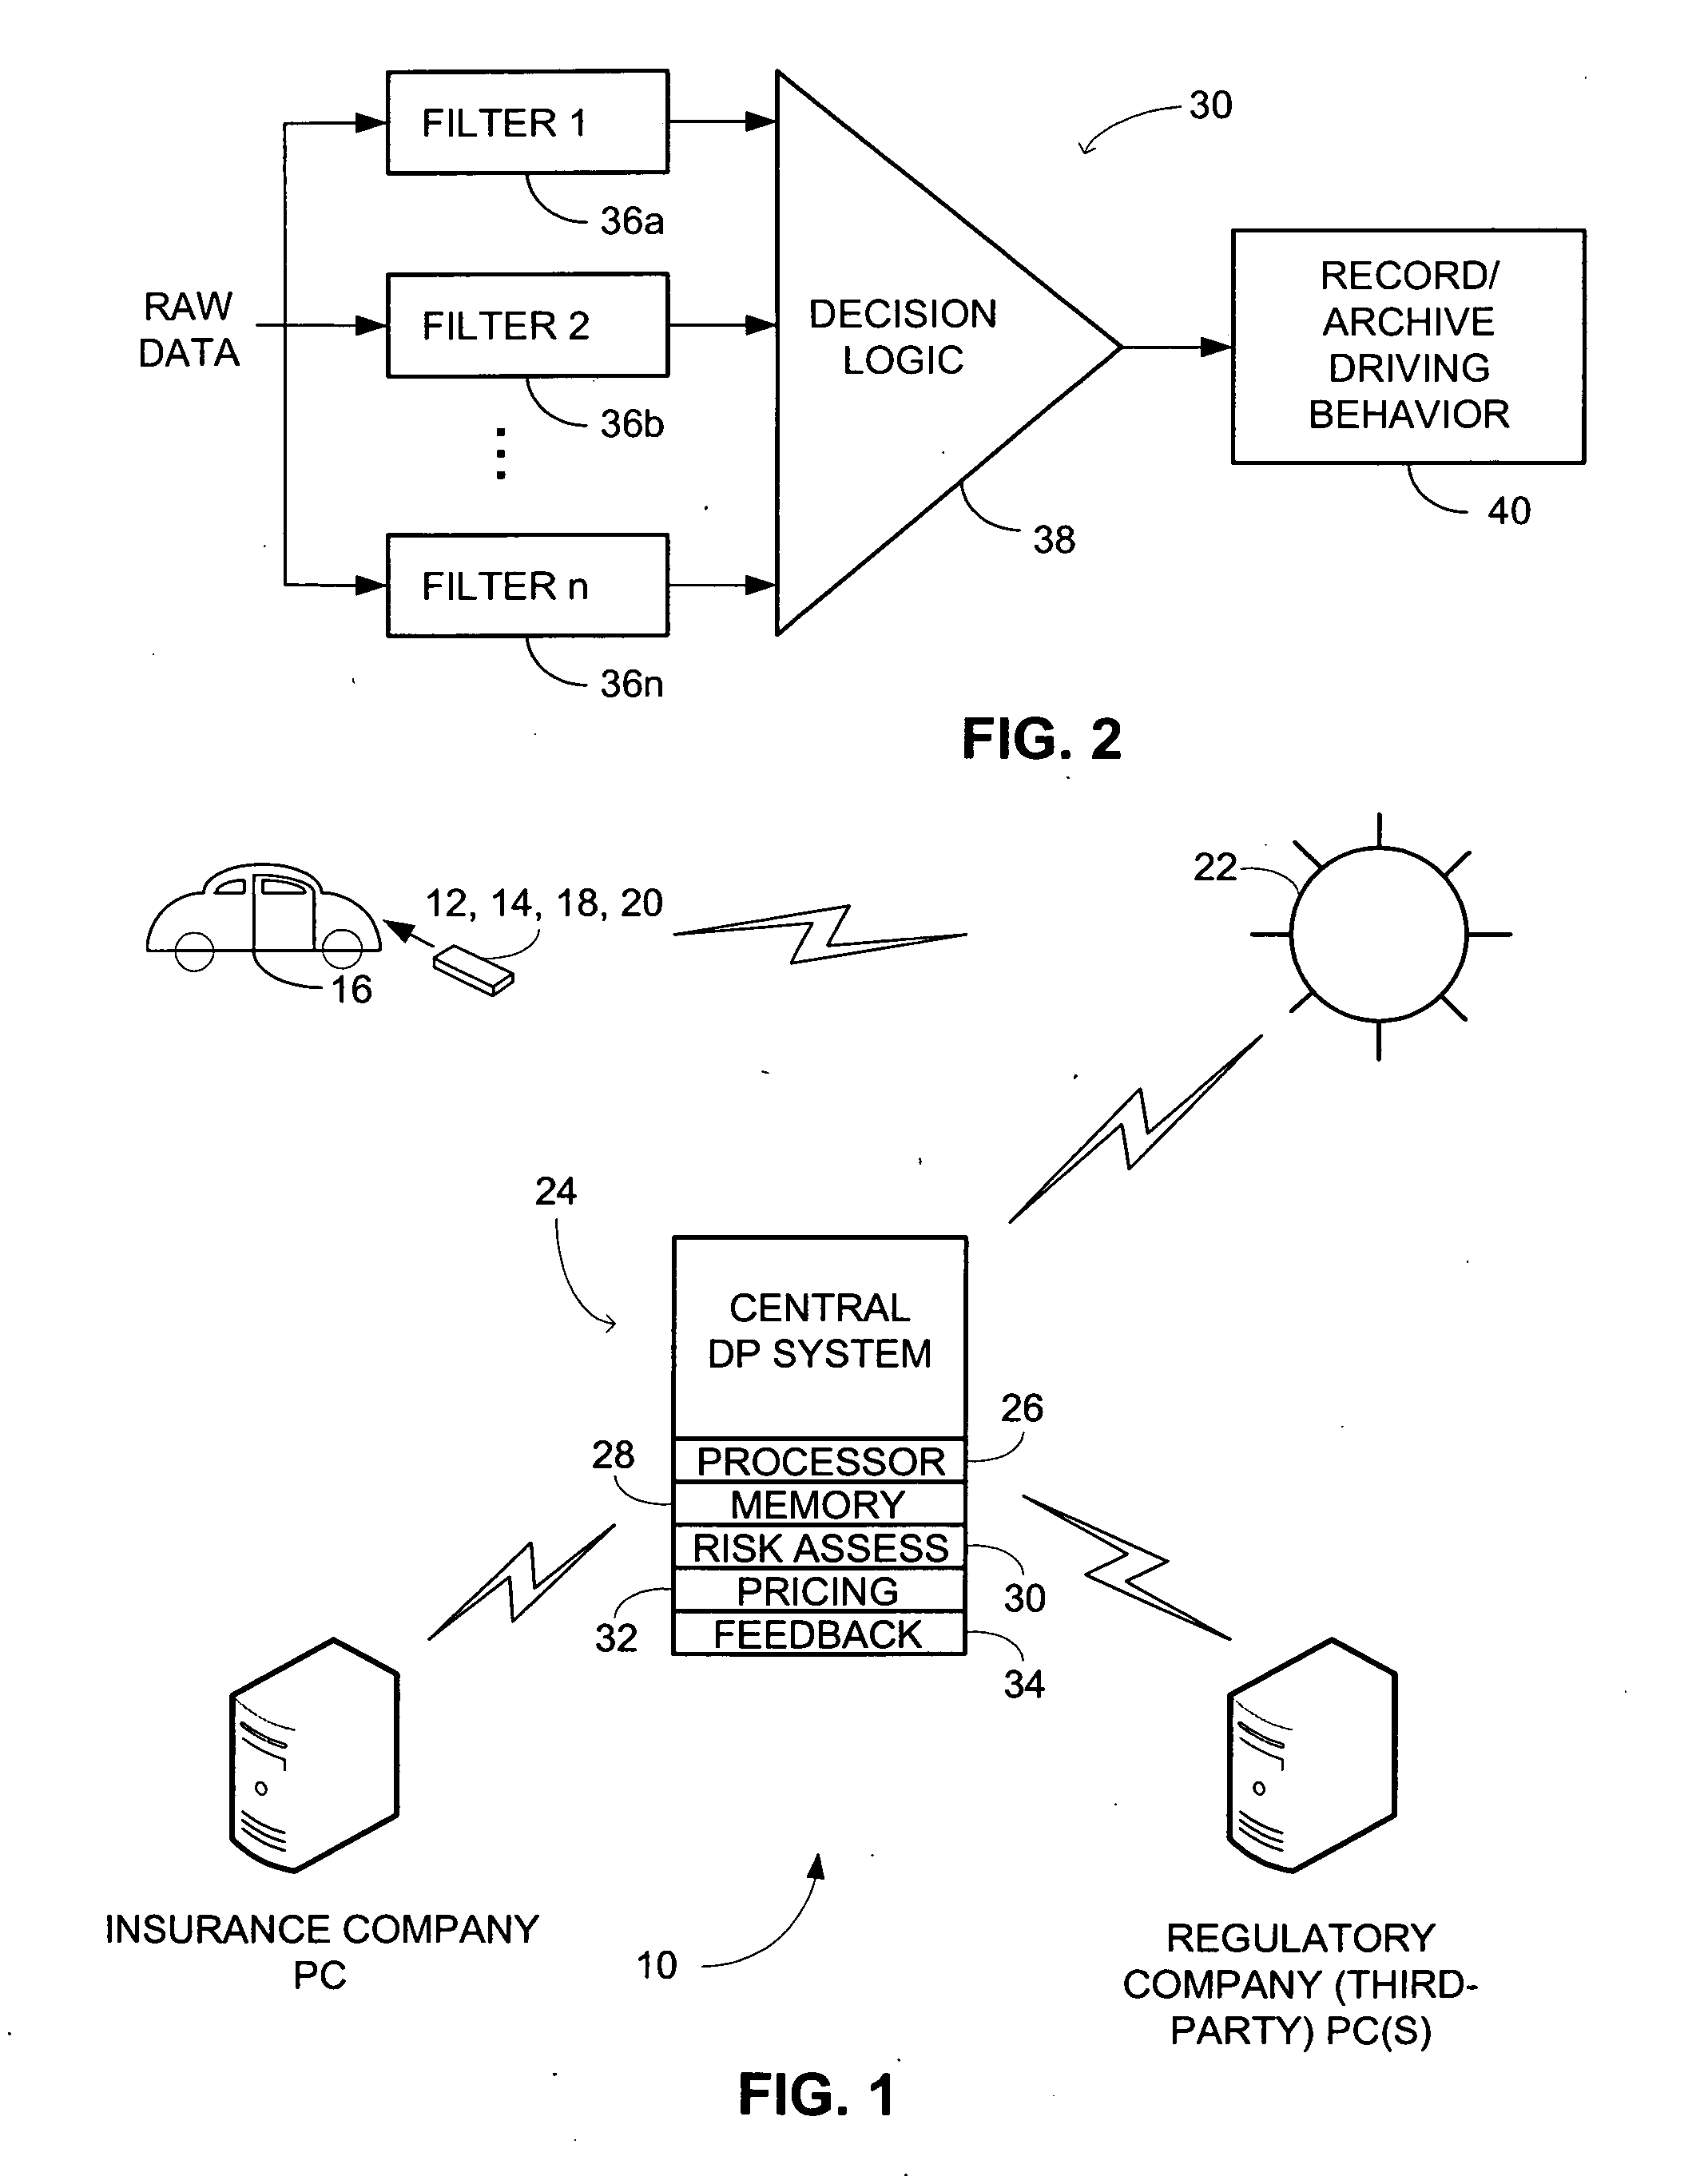 System and method for monitoring driving behavior with feedback